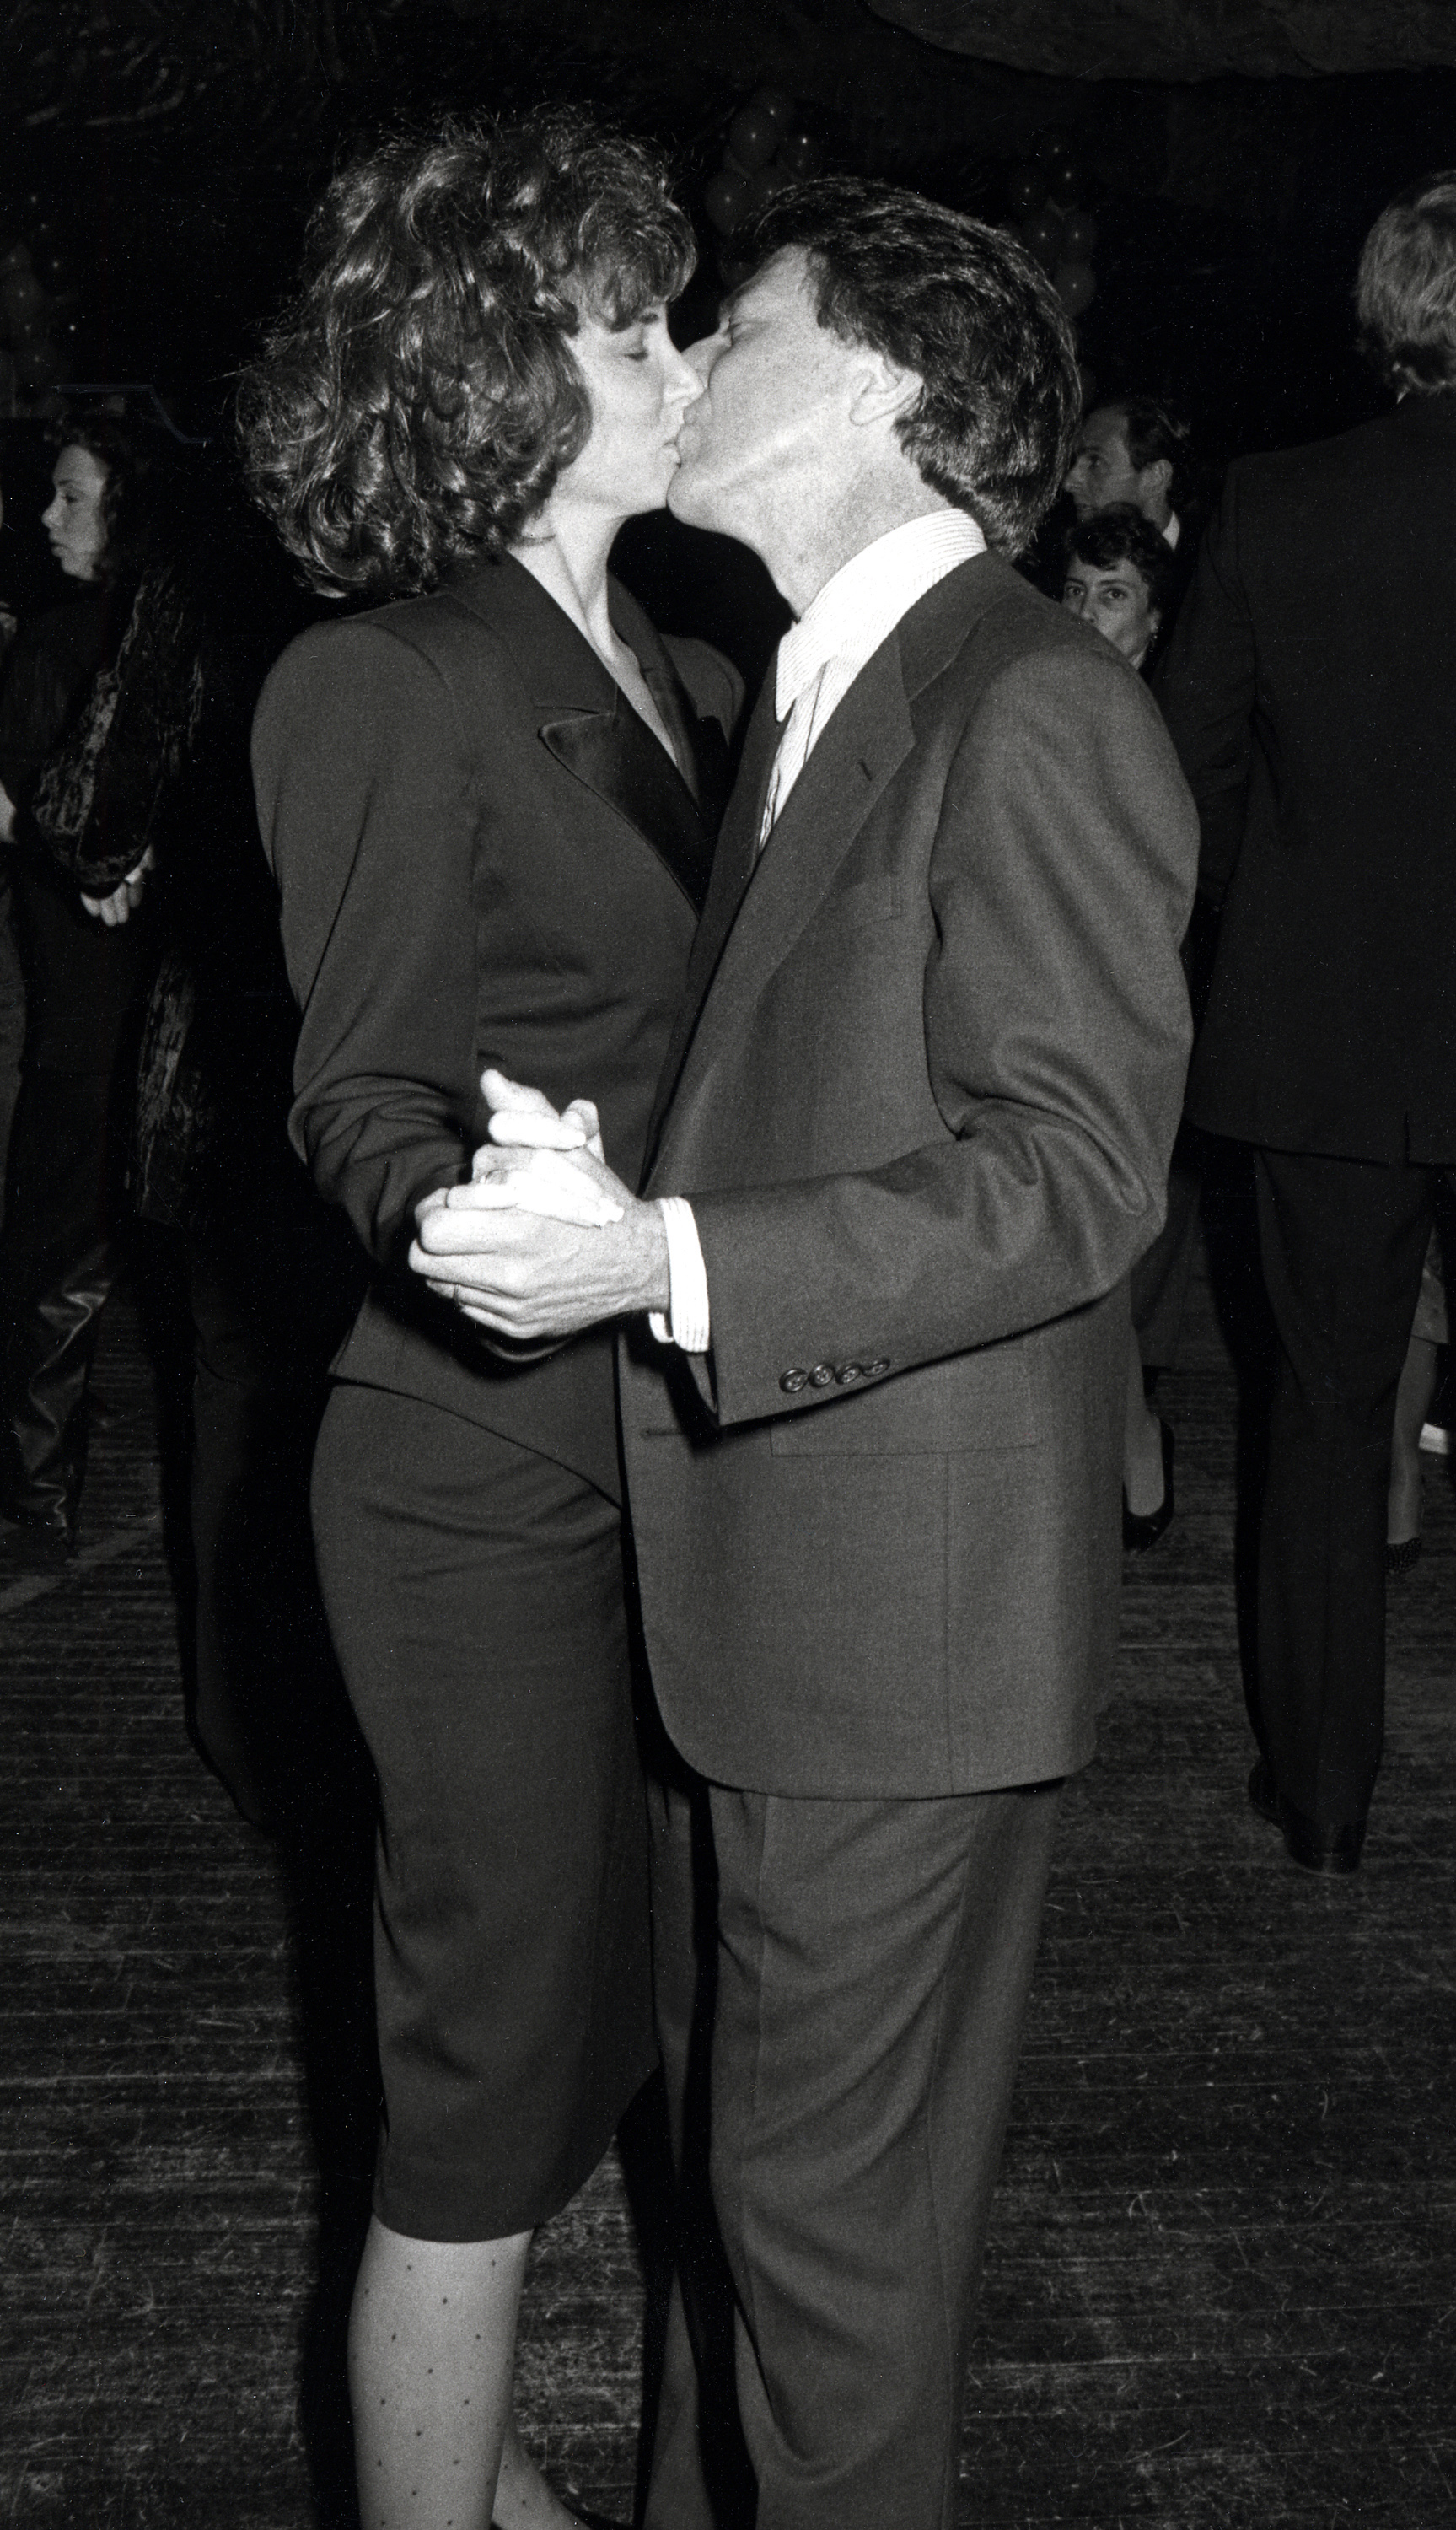 The woman and the actor during Smile Party in New York City on November 24, 1986. | Source: Getty Images